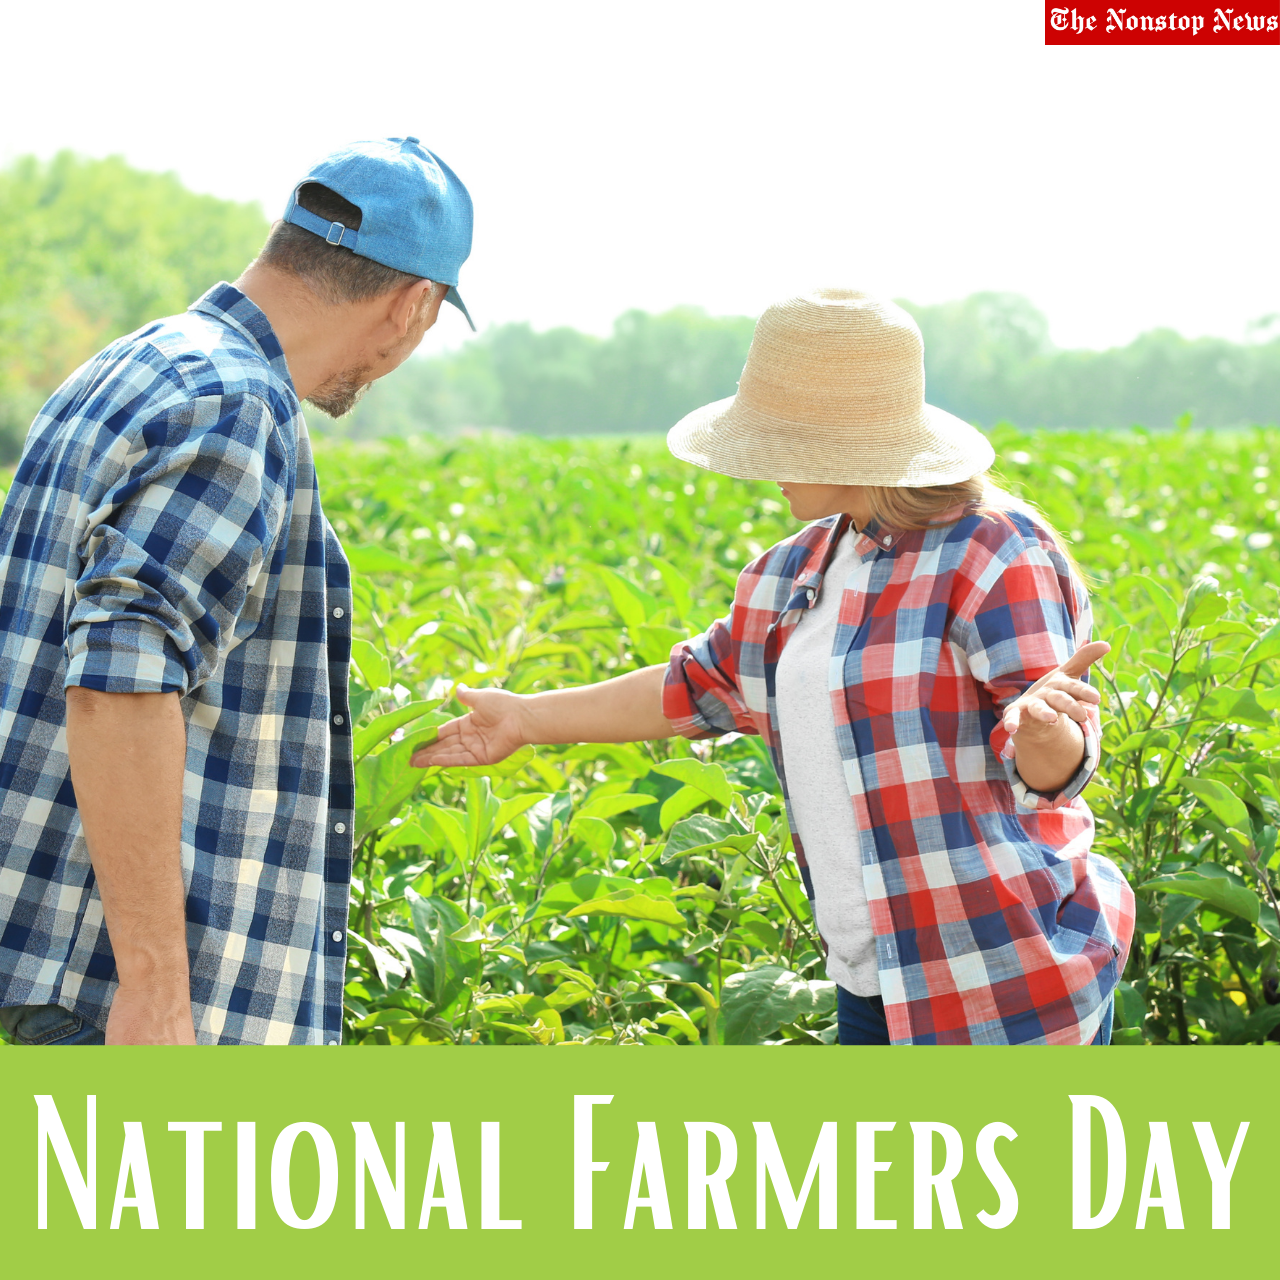 National Farmers Day 2021 Instagram Captions, Stickers, Greetings, Sayings, and Slogan to Share